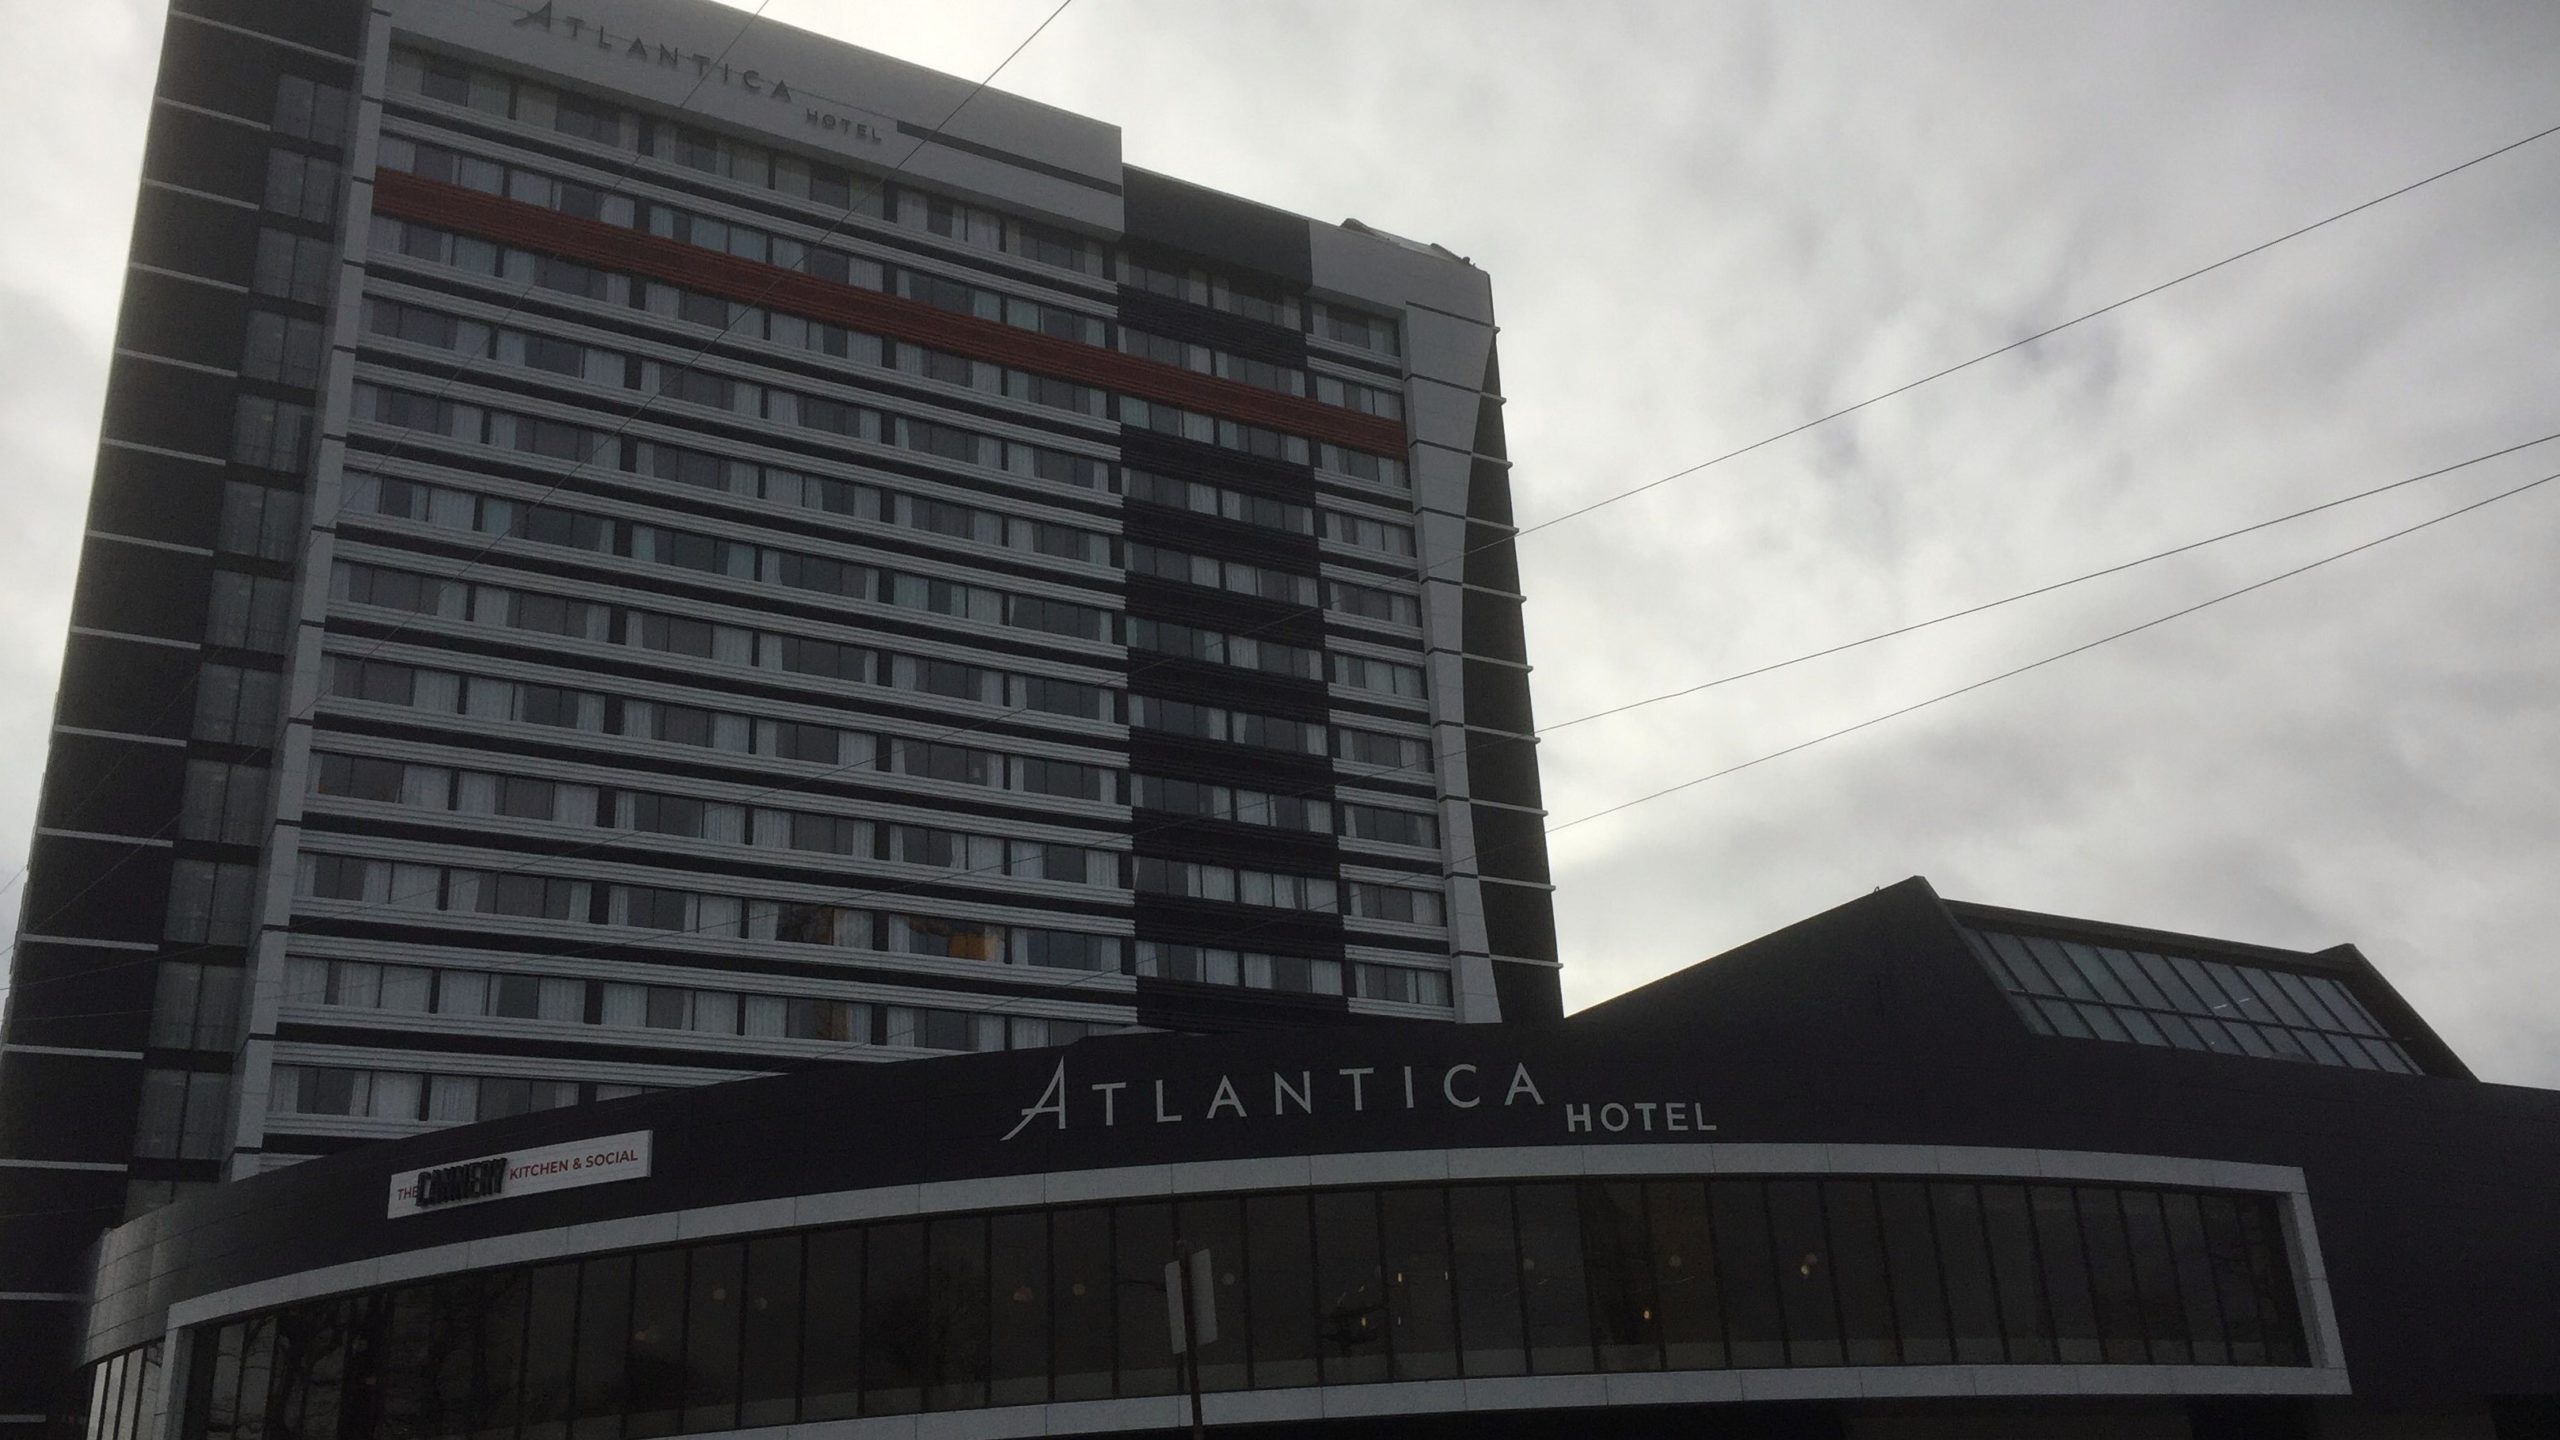 The province's hoteliers, like the Atlantica in Halifax,  are hoping their industry recovers somewhat in 2022.  